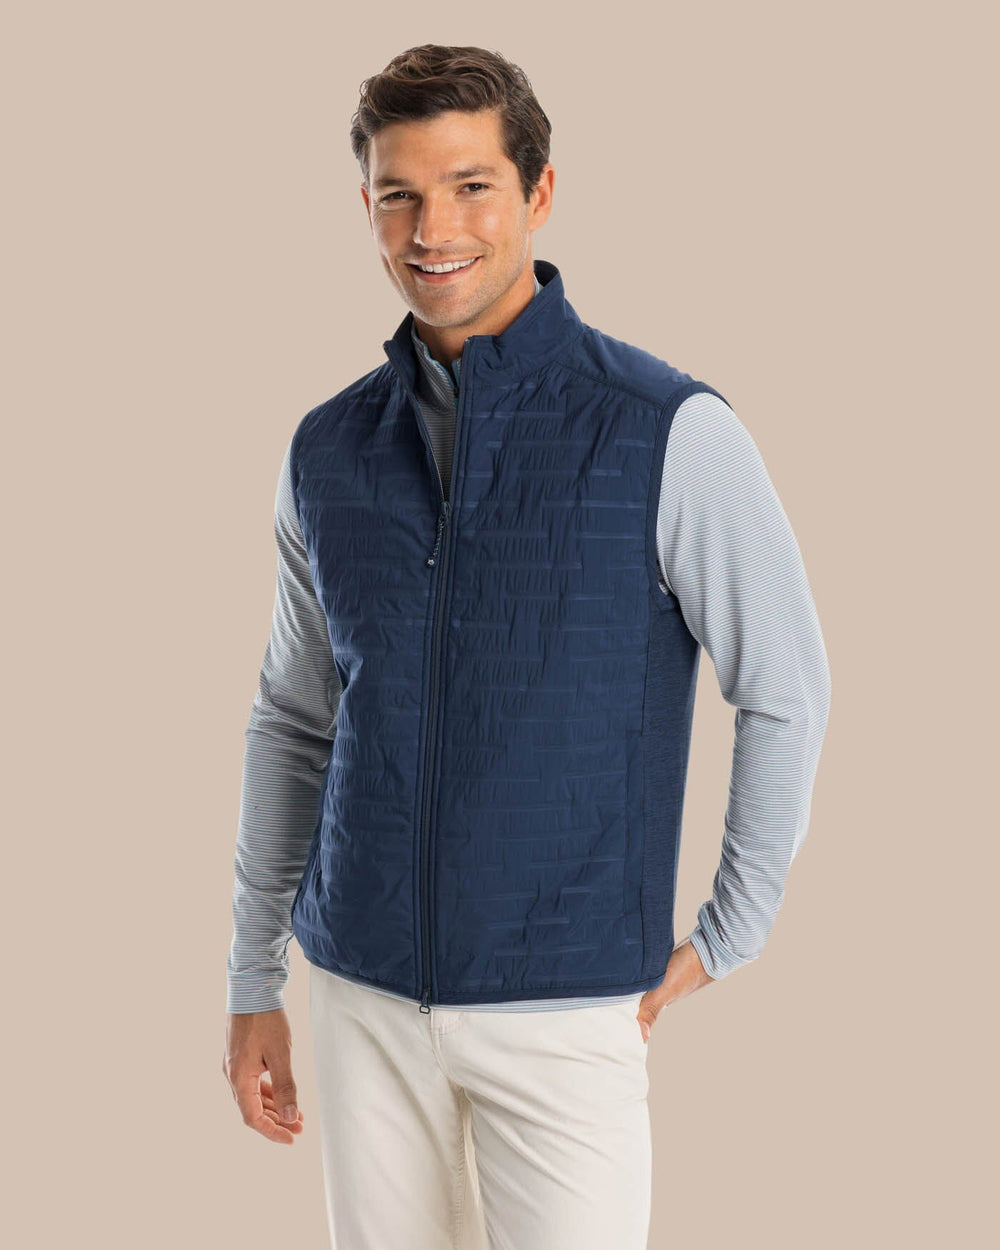 The model front view of the Men's Abercorn Performance Vest by Southern Tide - True Navy